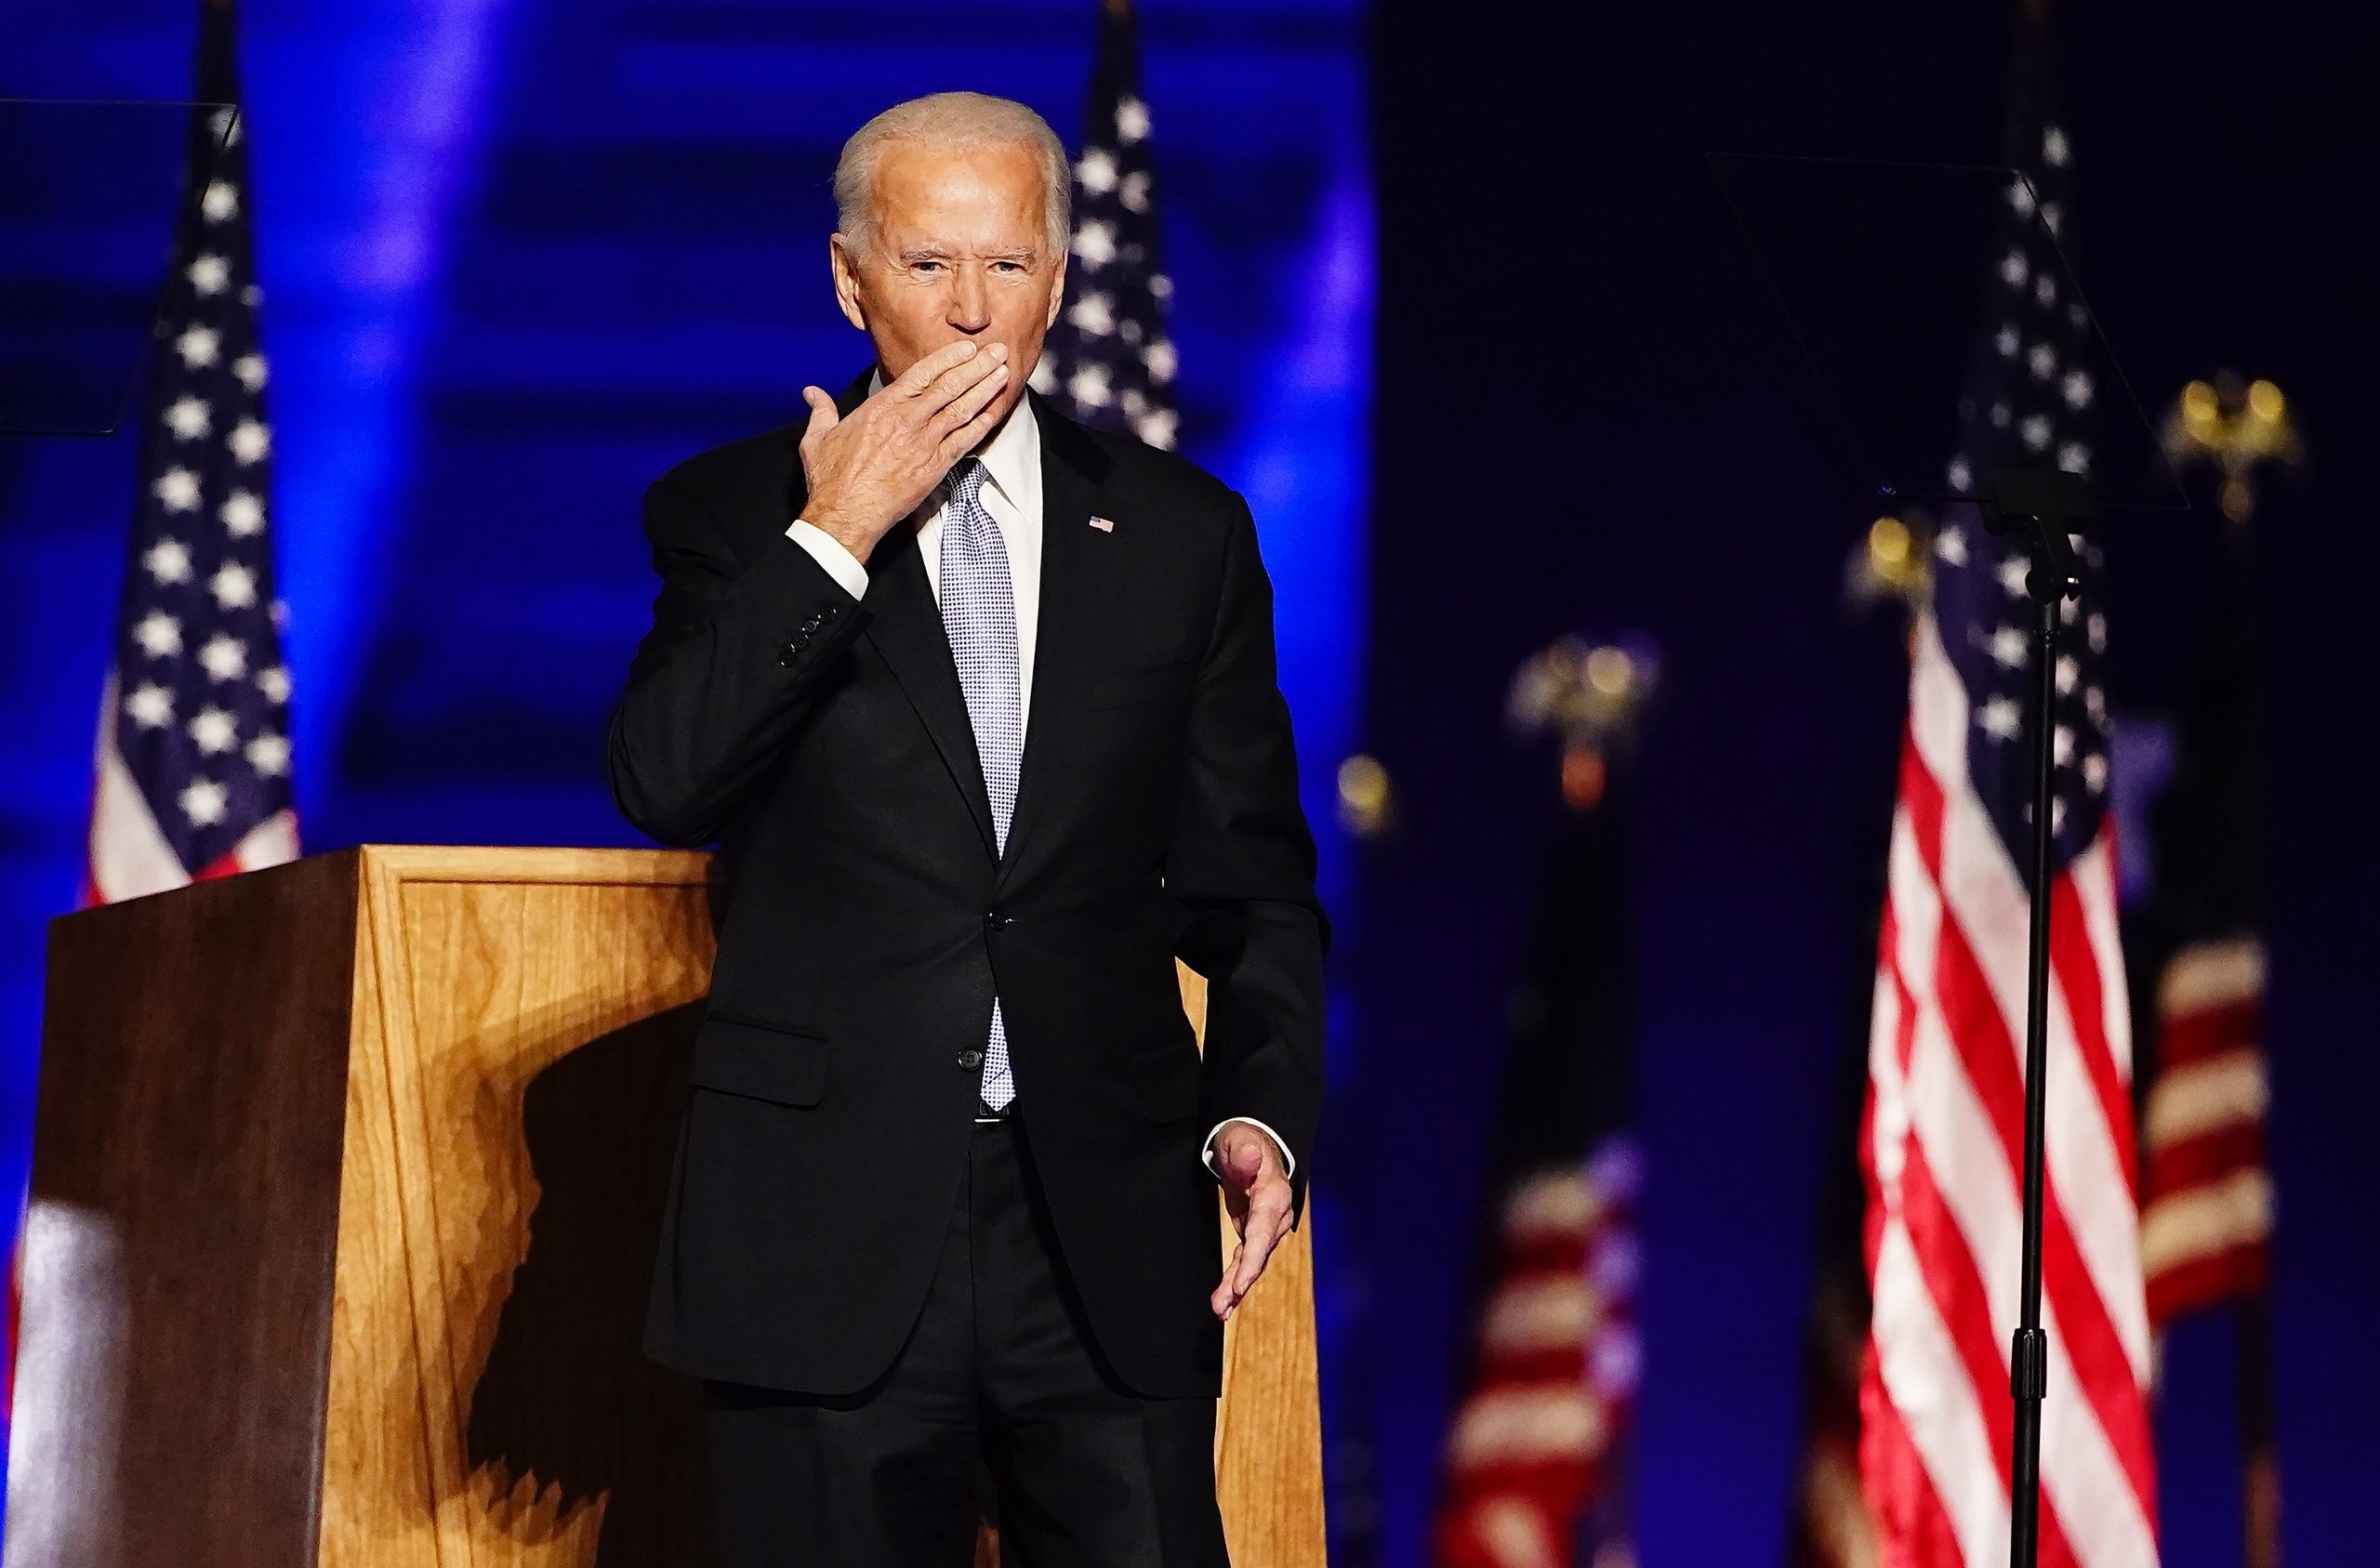 epa08806573 President-elect Joe Biden blows a kiss after delivering his victory address after being declared the winner in the 2020 presidential election in Wilmington, Delaware, USA, 07 November 2020. Biden defeated incumbent US President Donald J. Trump.  EPA/JIM LO SCALZO